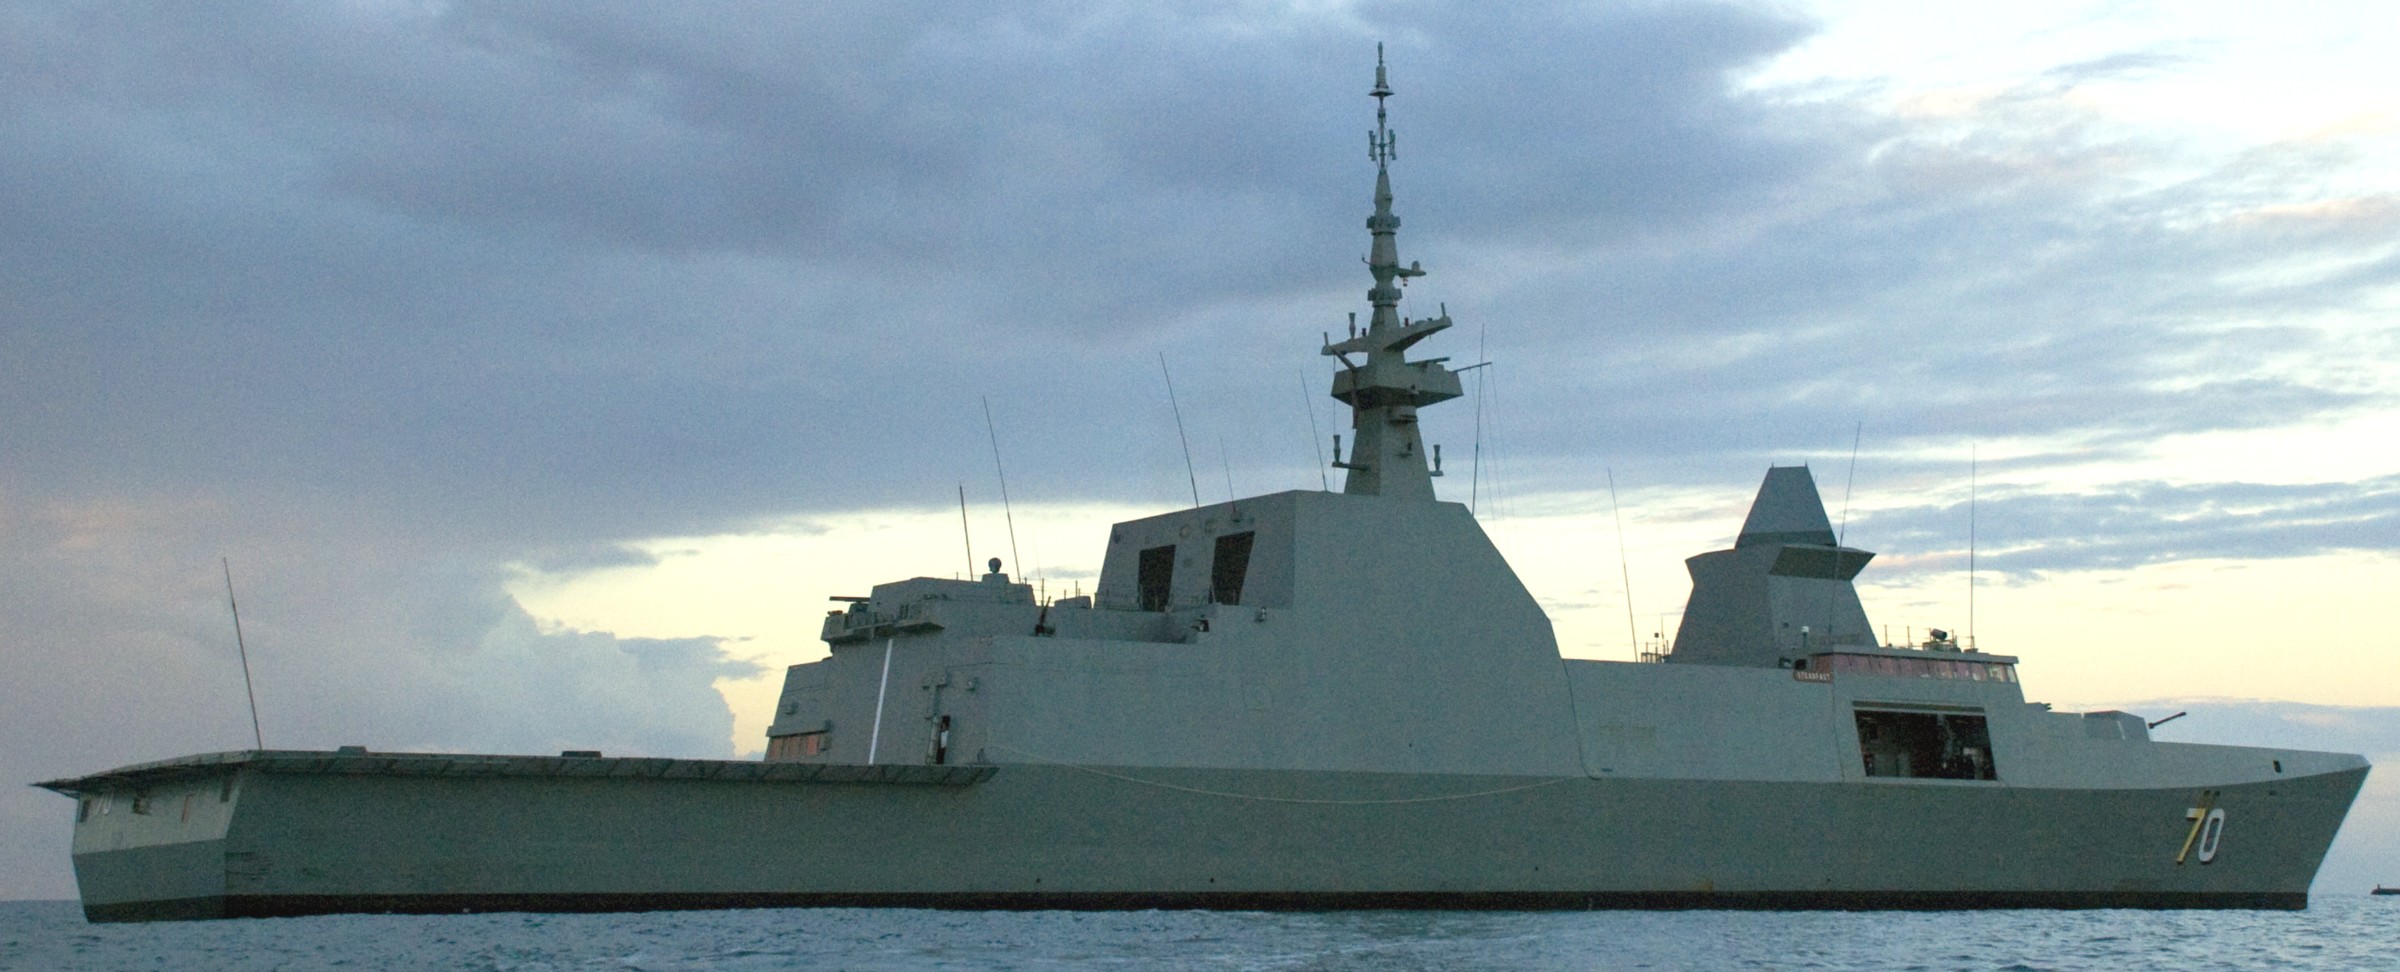 70 rss steadfast formidable class multi-mission missile frigate ffg republic singapore navy 23